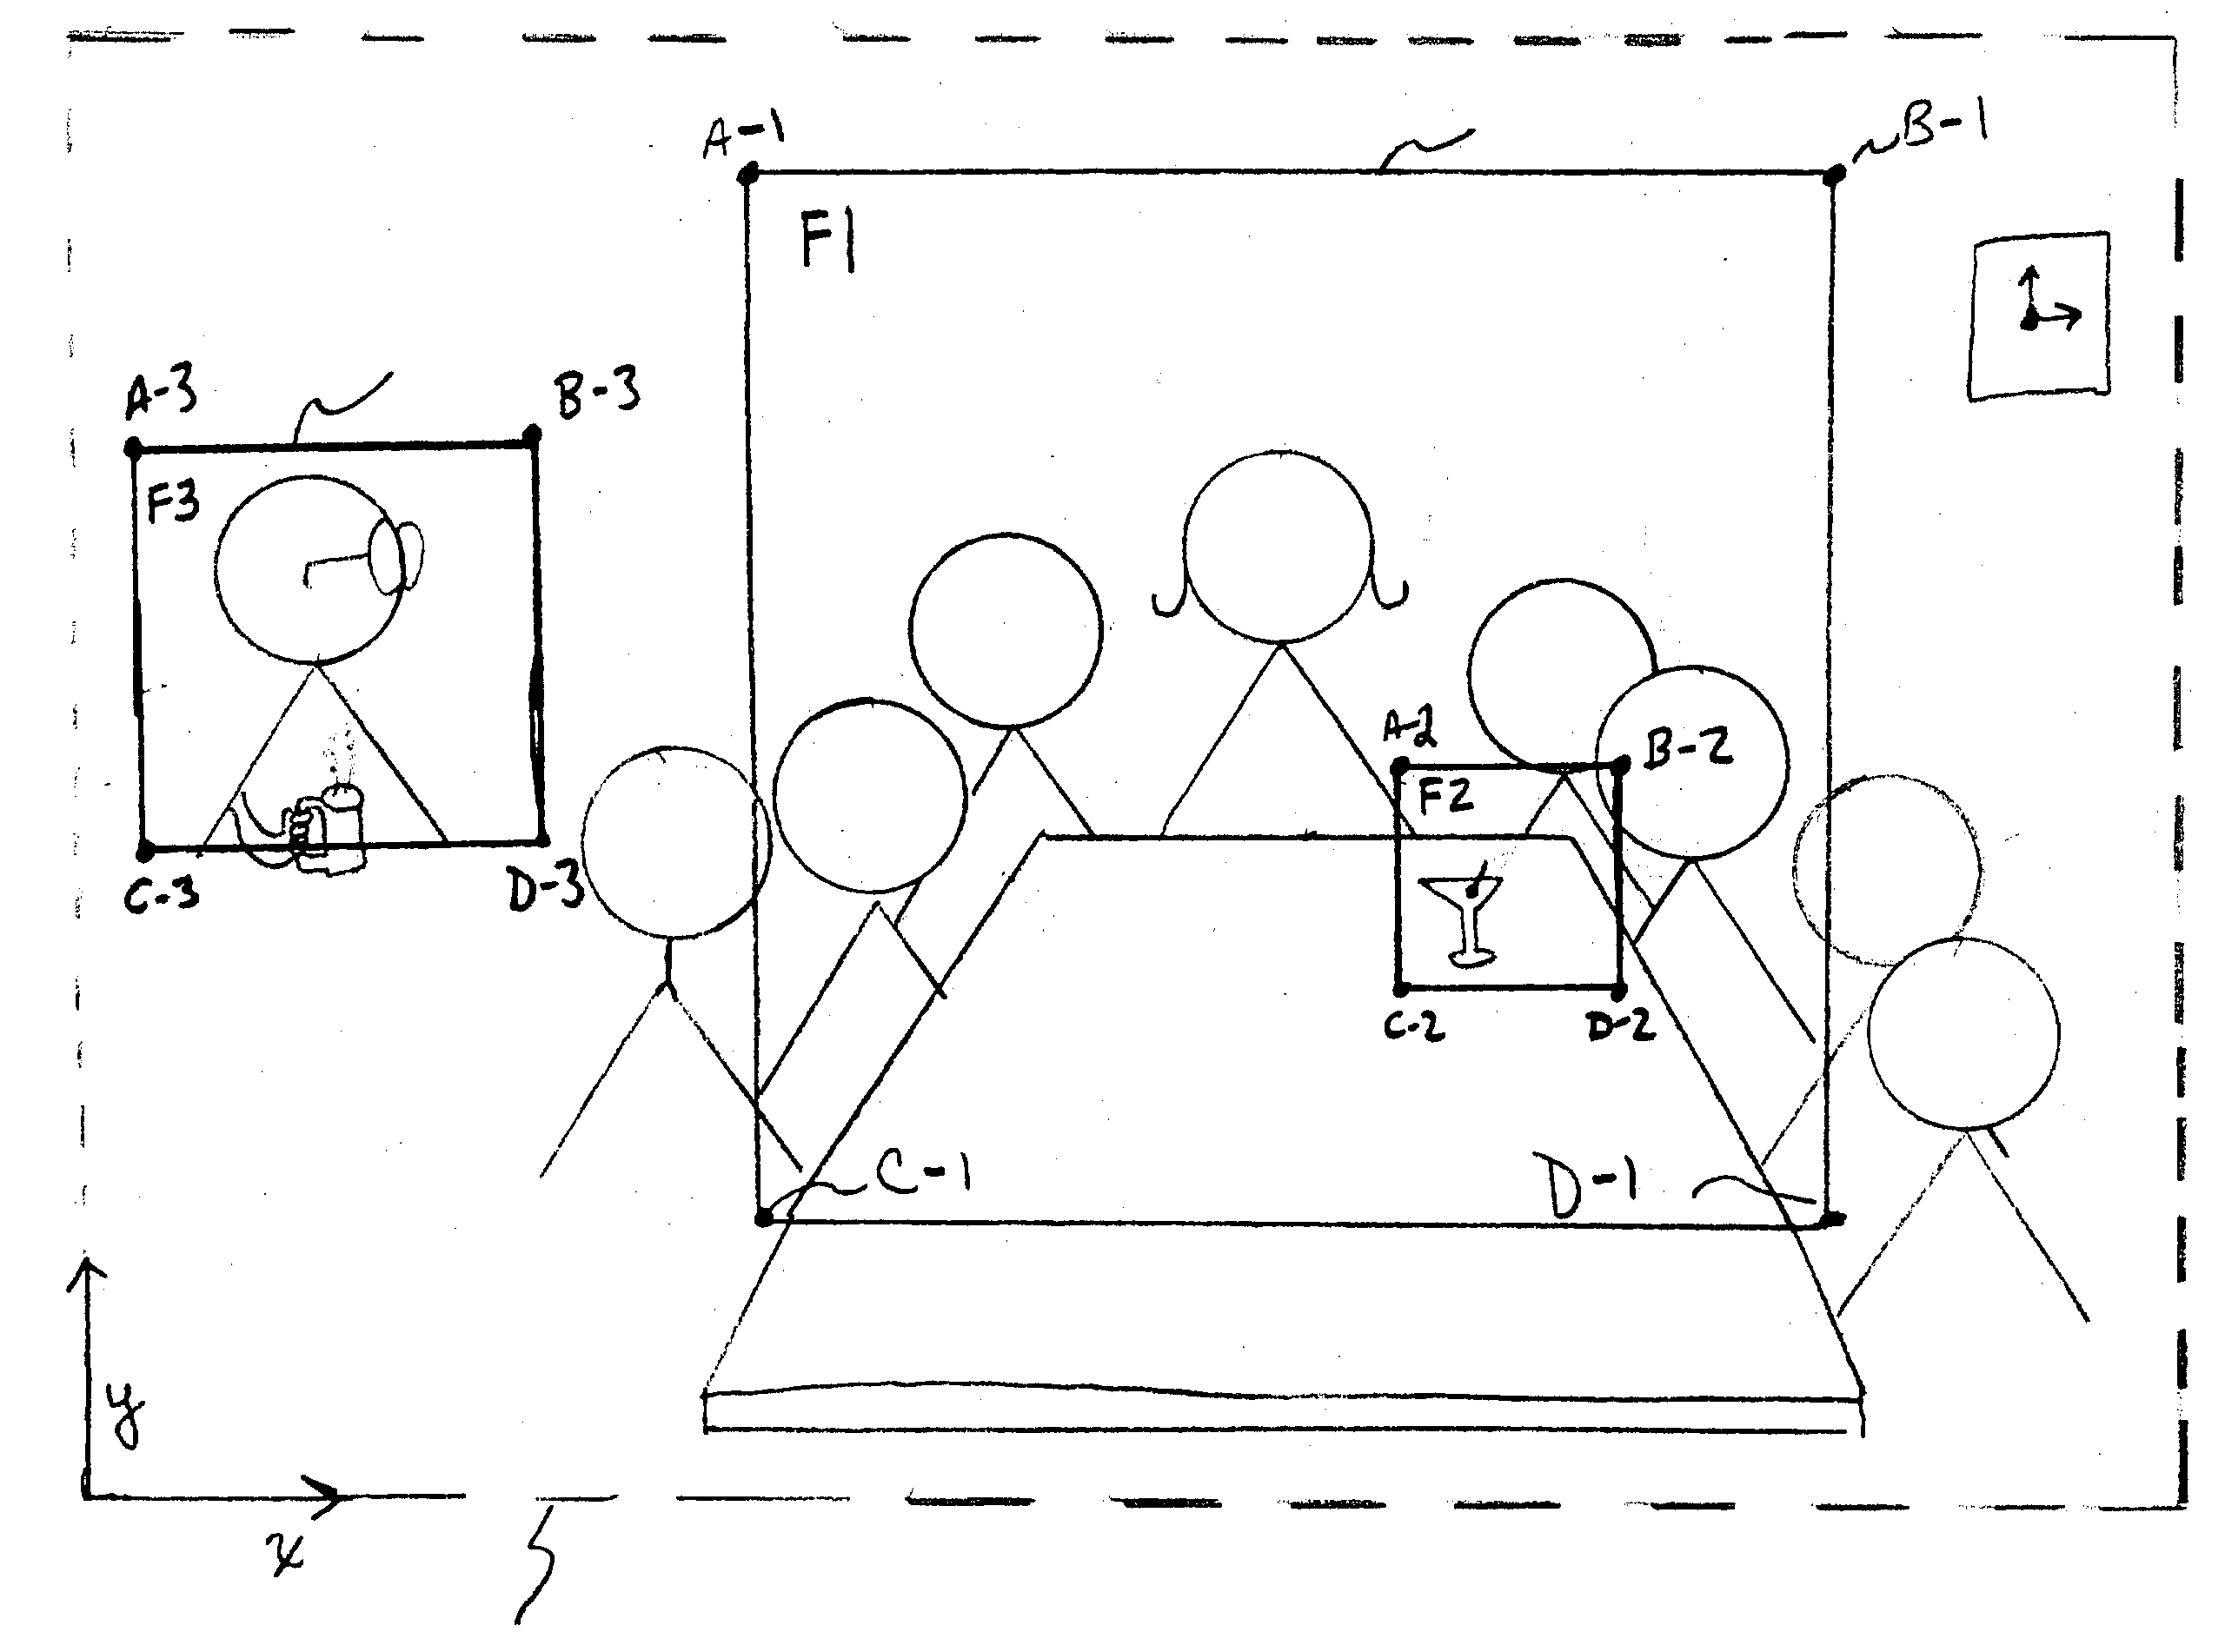 Apparatus and method for providing electronic image manipulation in video conferencing applications